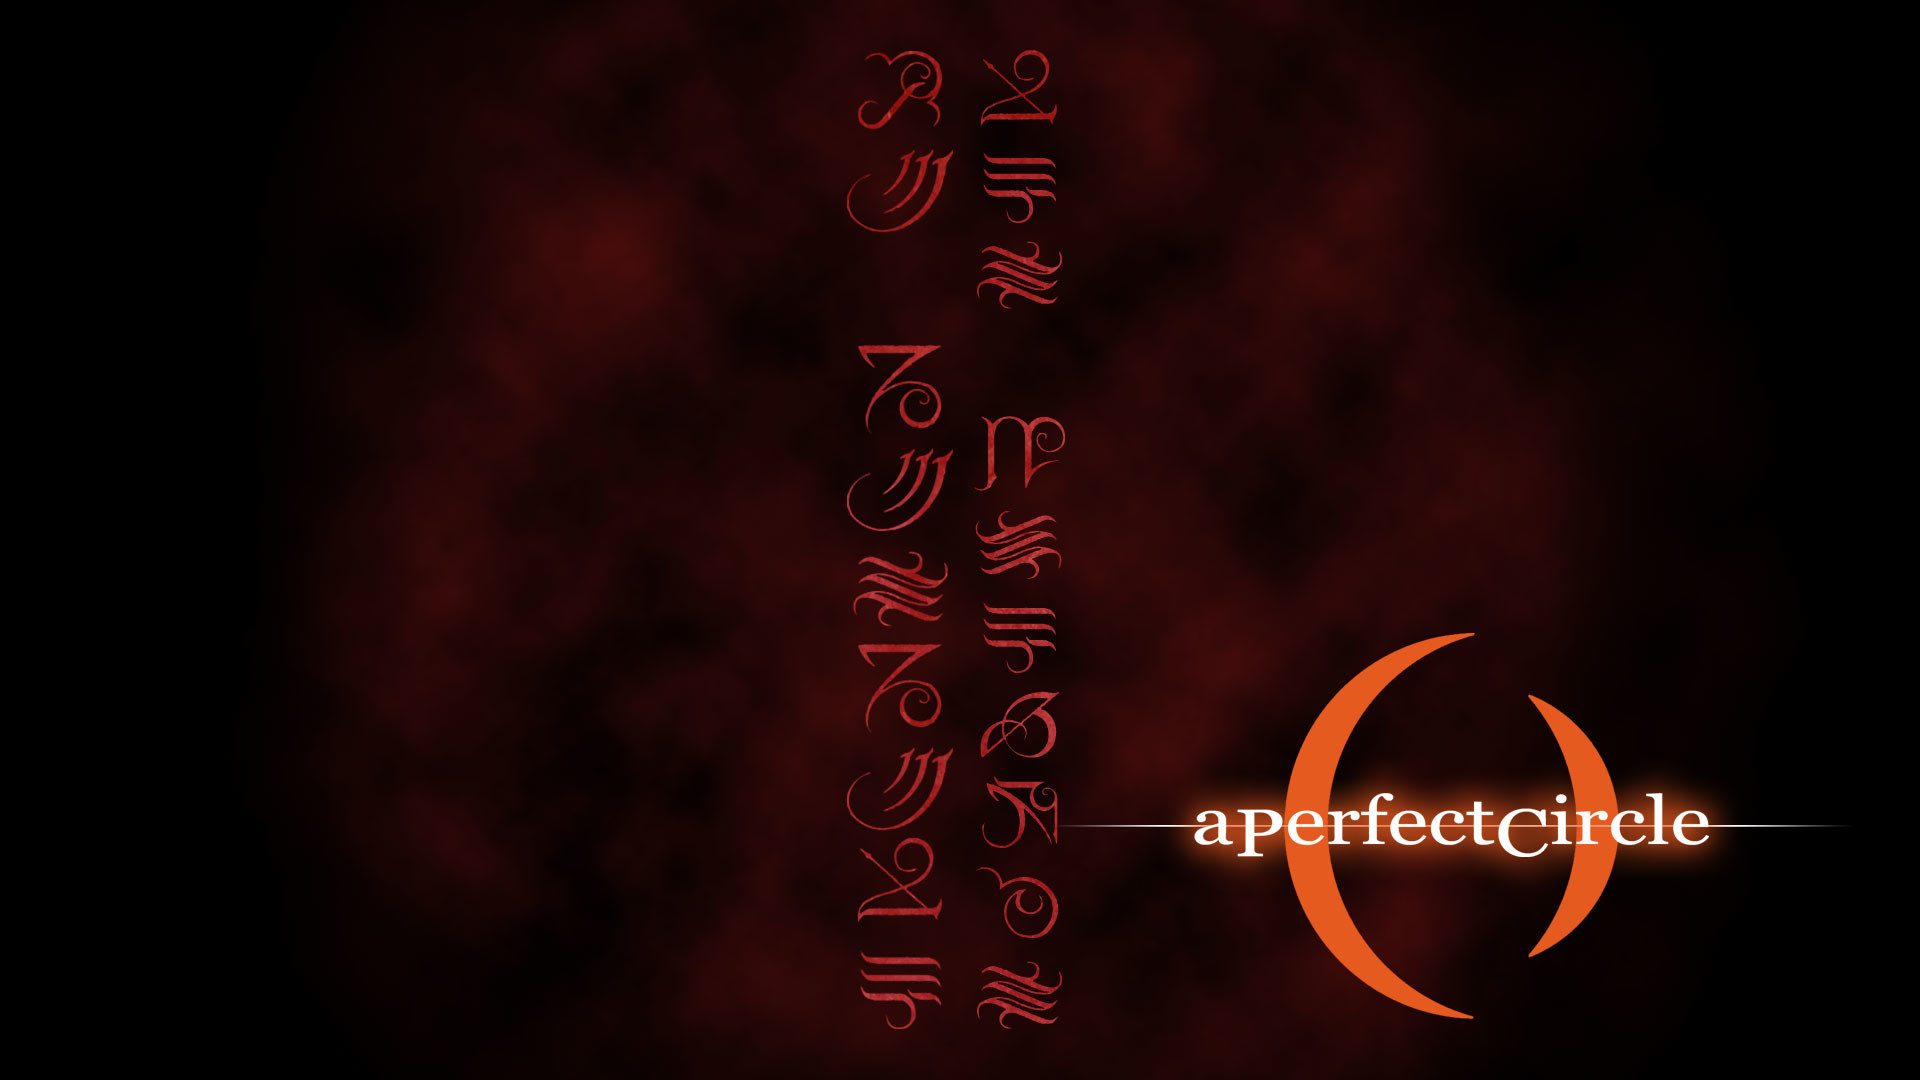 a perfect circle wallpaper,text,font,red,calligraphy,darkness